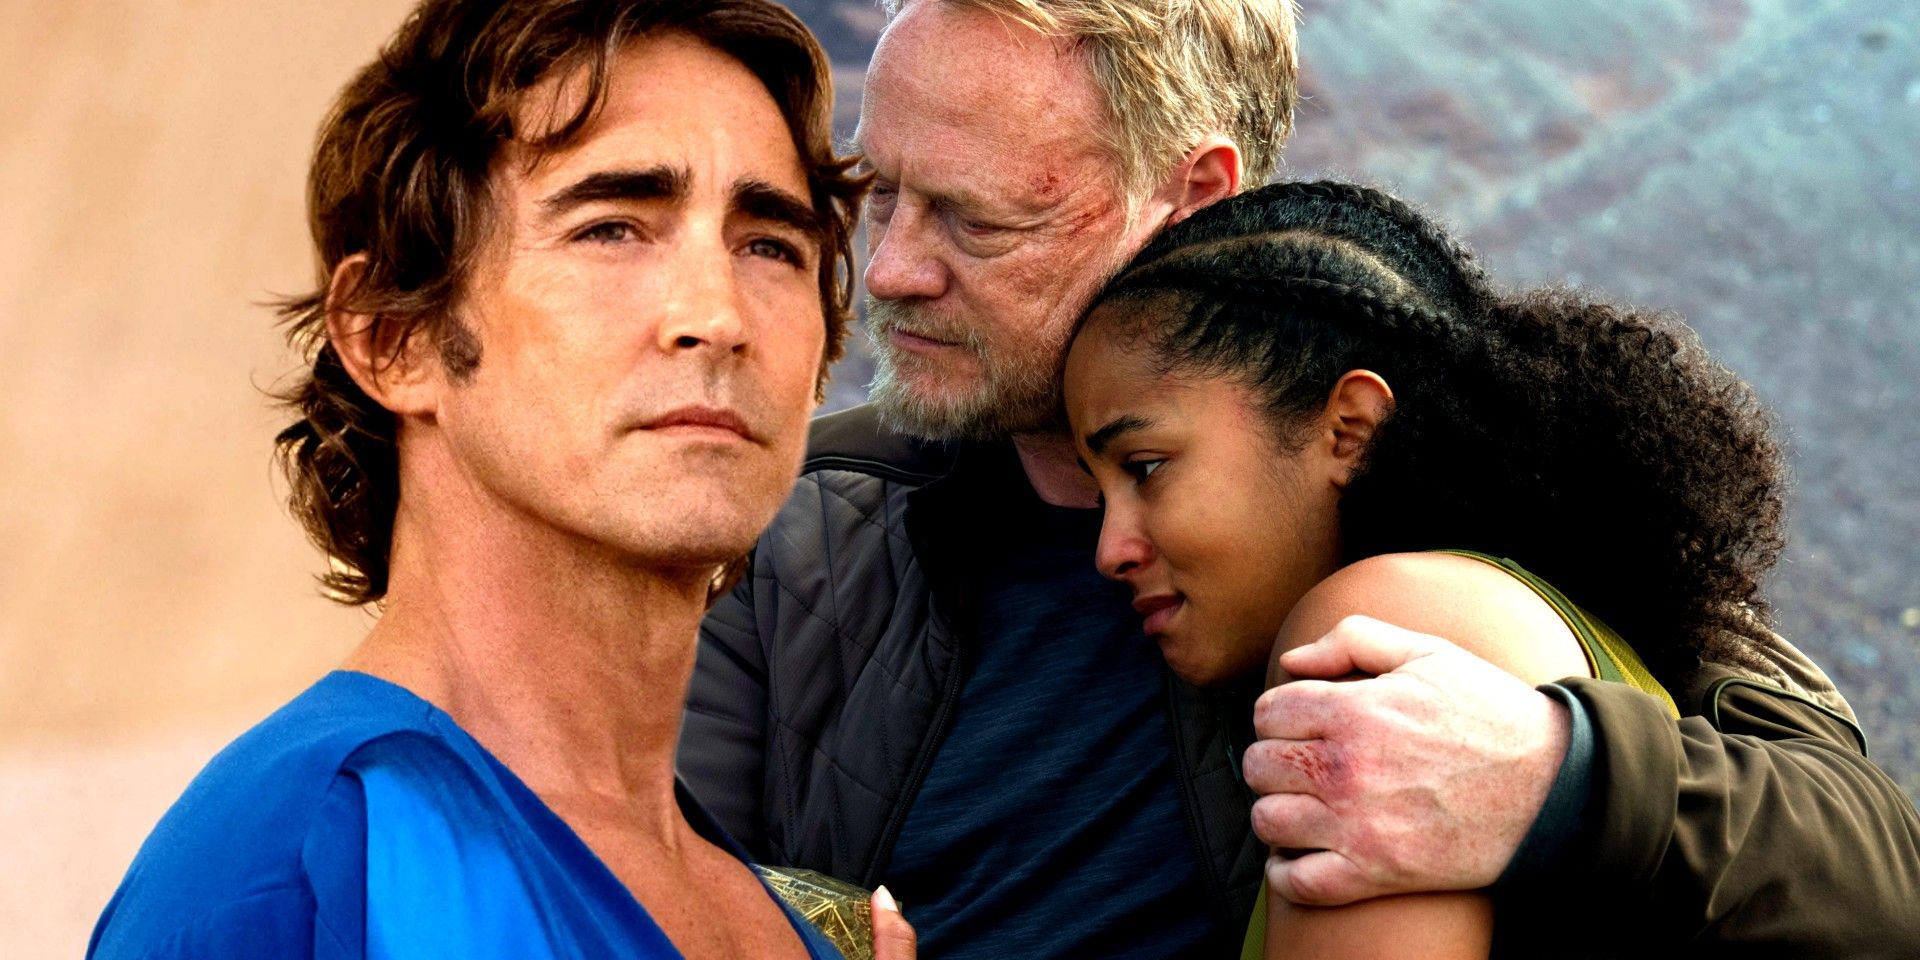 Lee Pace as Cleon and Hari with Gaal in Foundation season 2